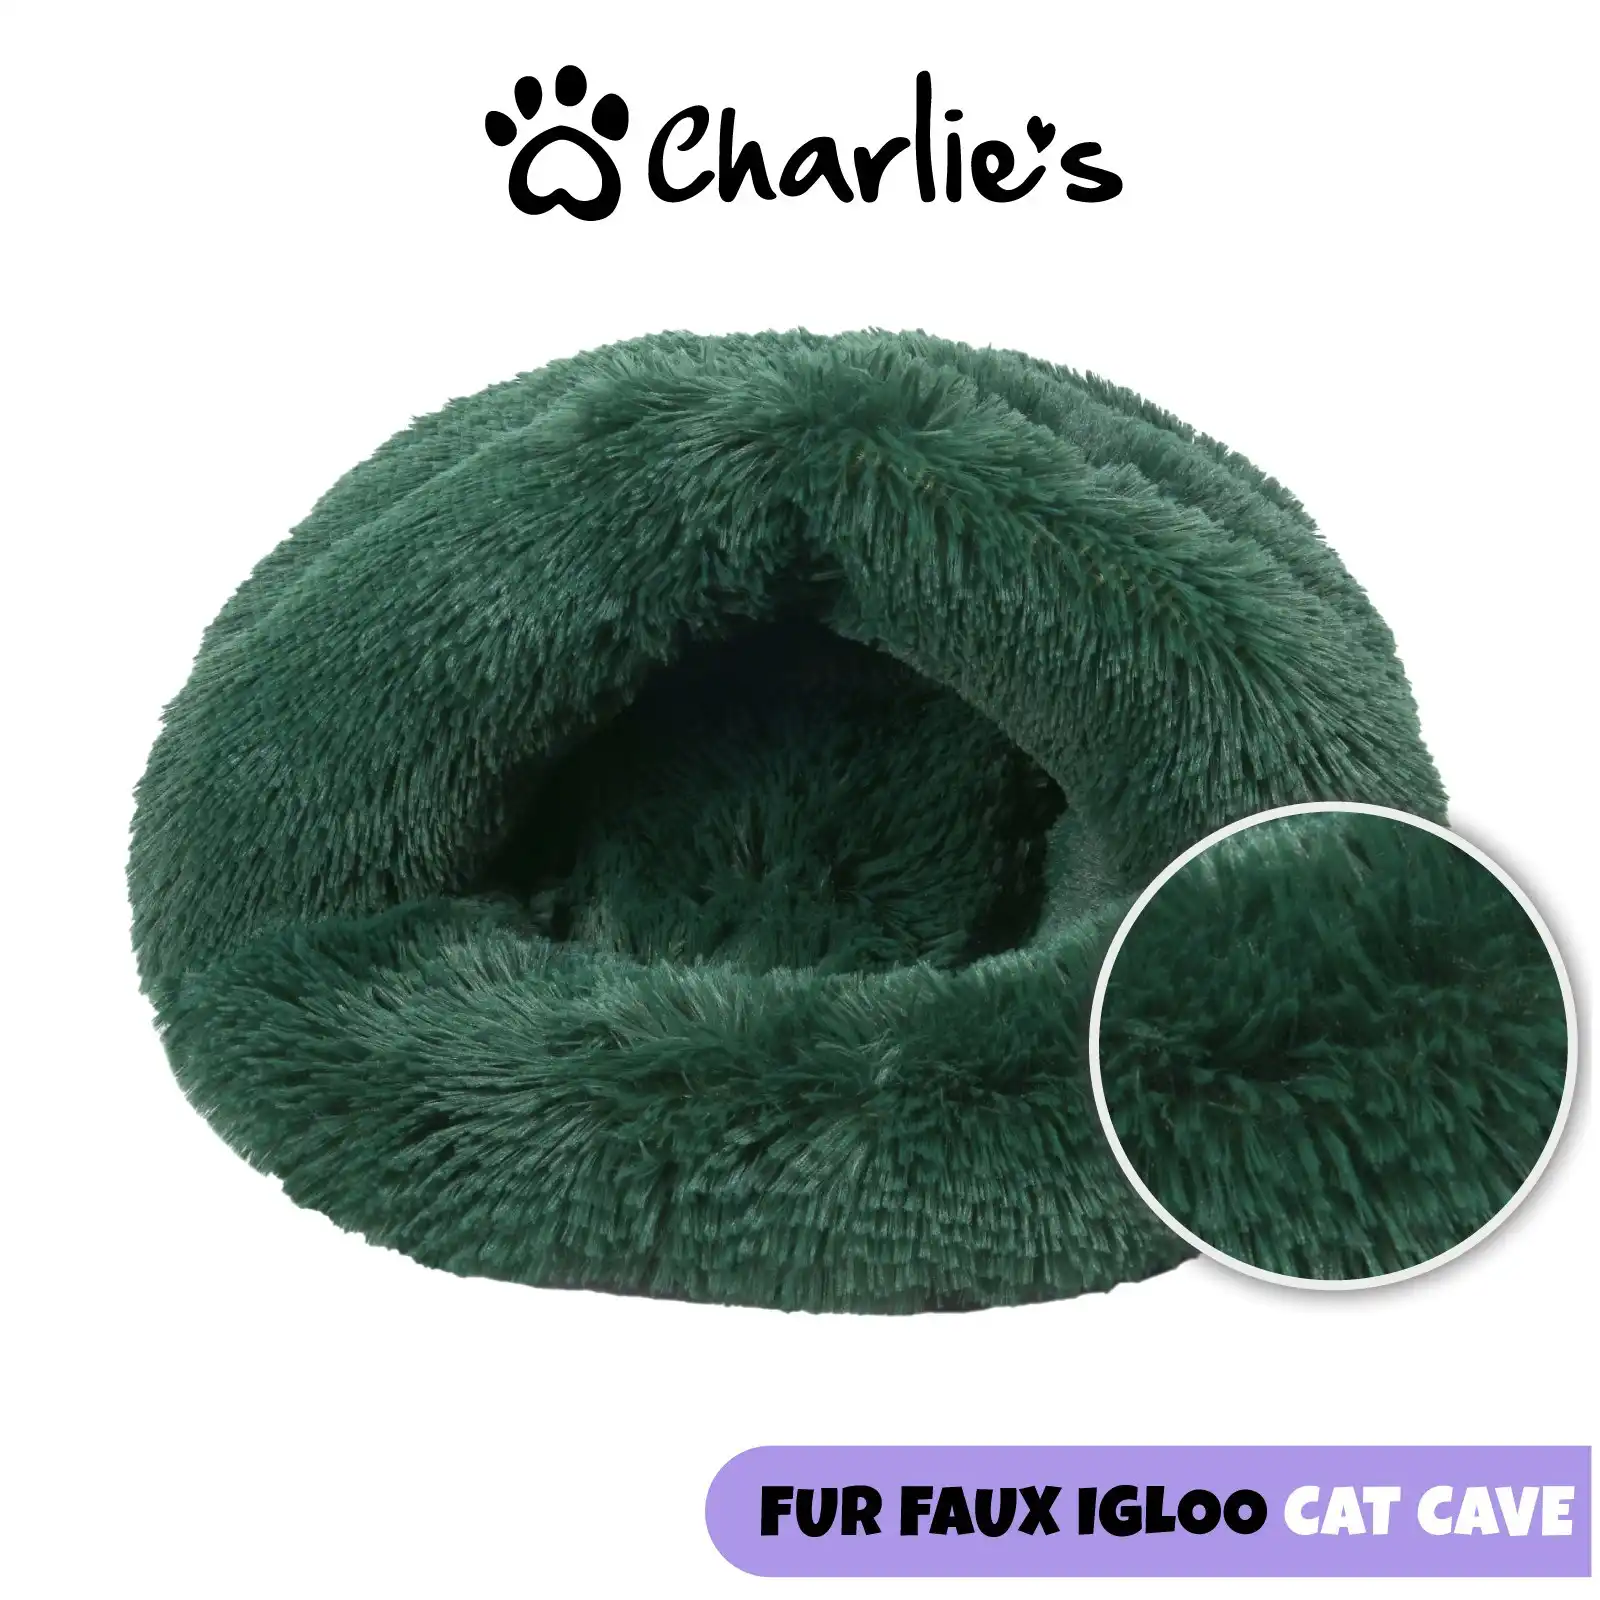 Charlie's Shaggy Fur Faux Igloo Cat Cave Bed Eden Green 60x50cm